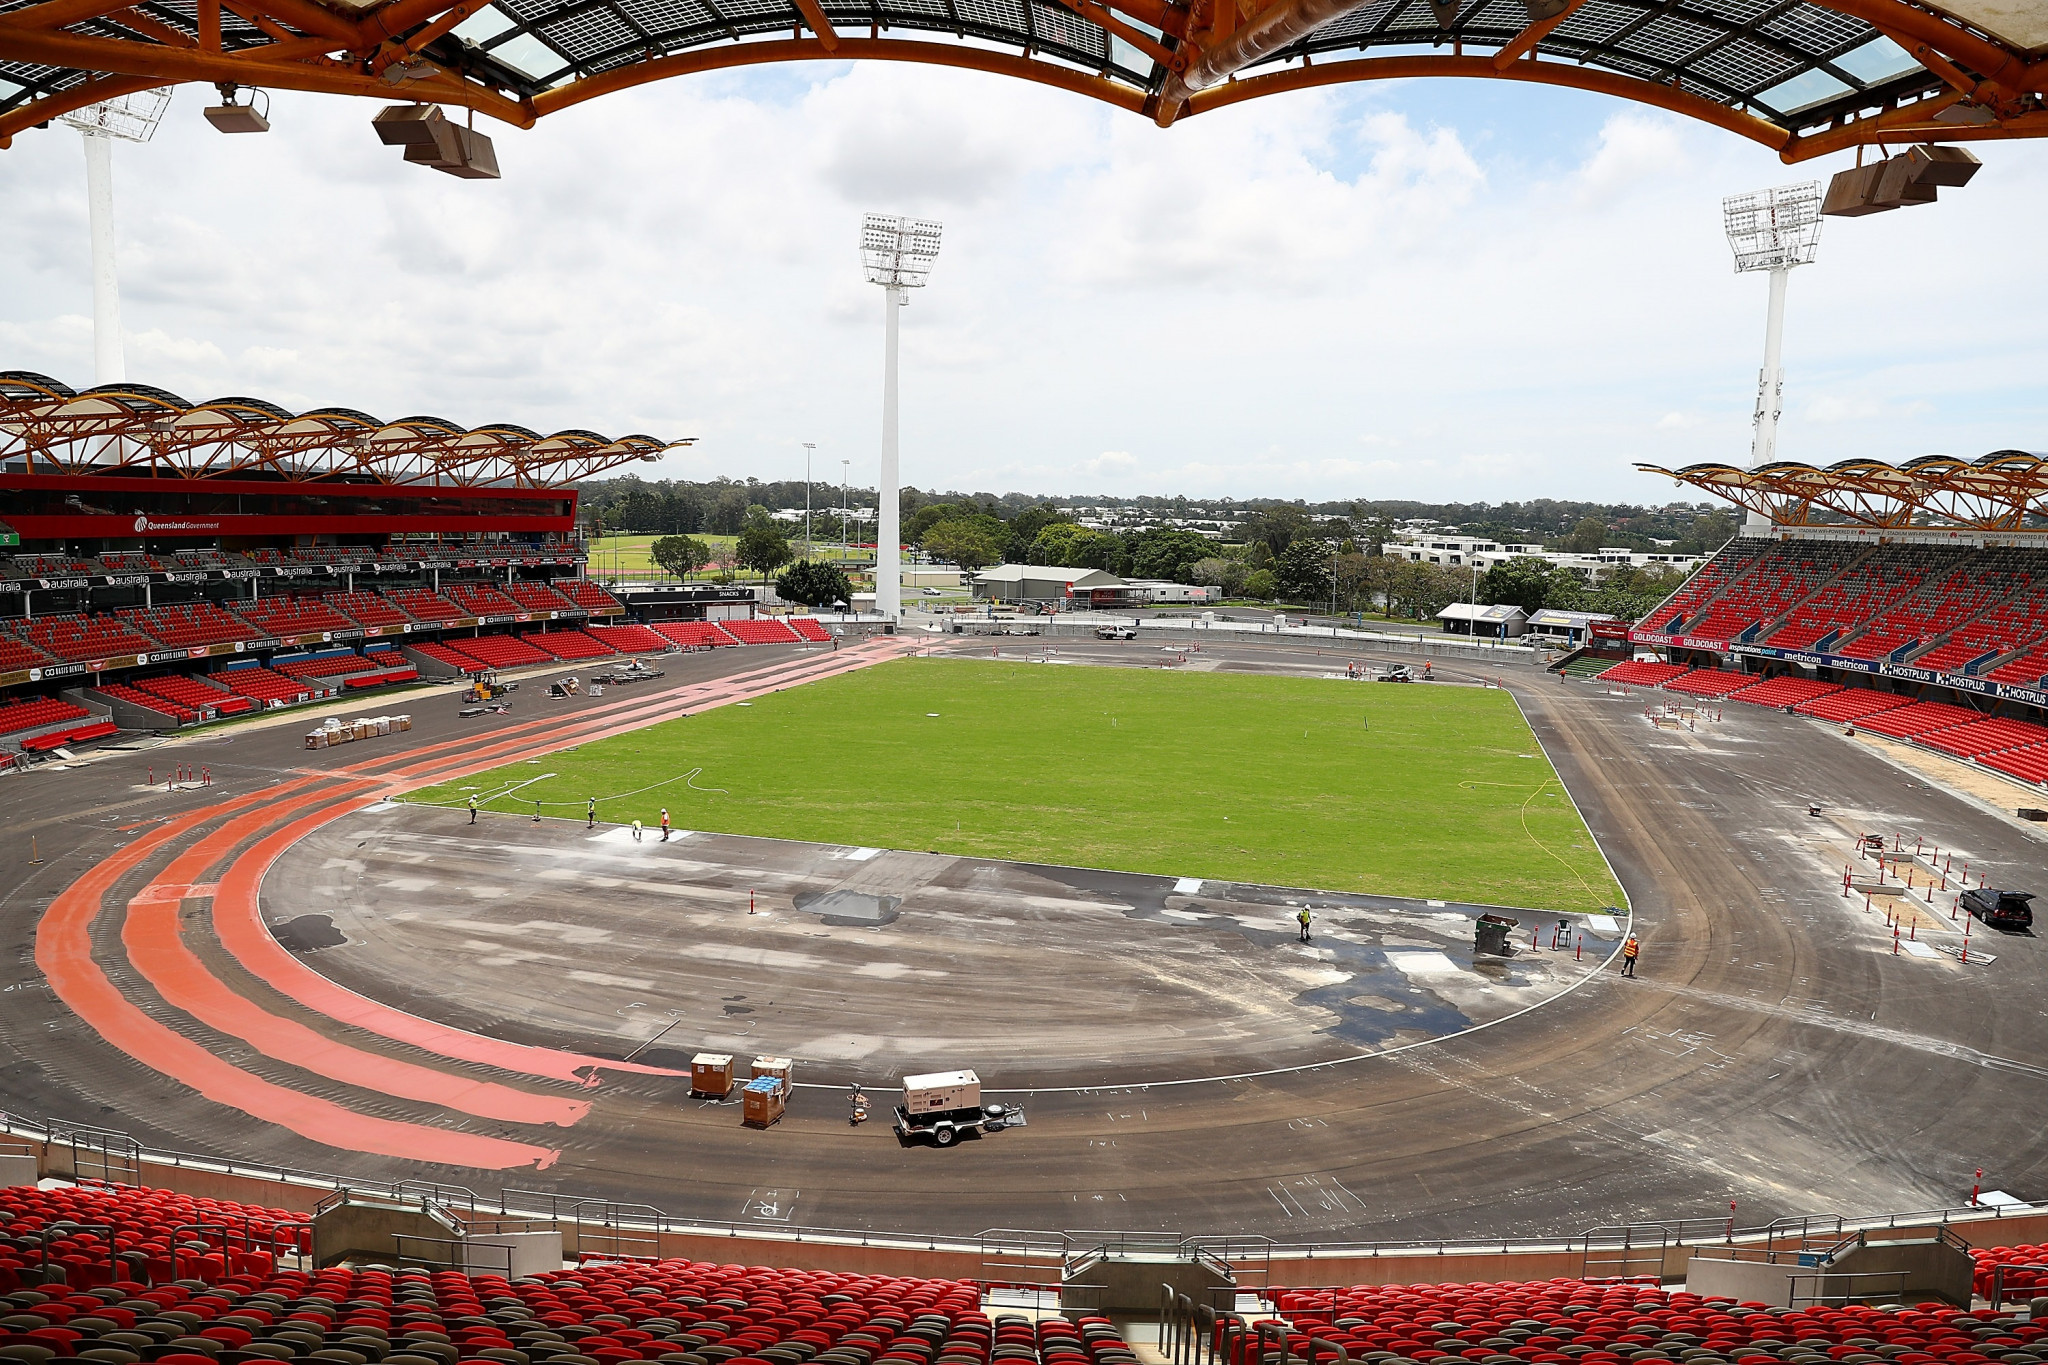 Carrara Stadium will play host to the Gold Coast 2018 Opening and Closing Ceremonies ©Getty Images